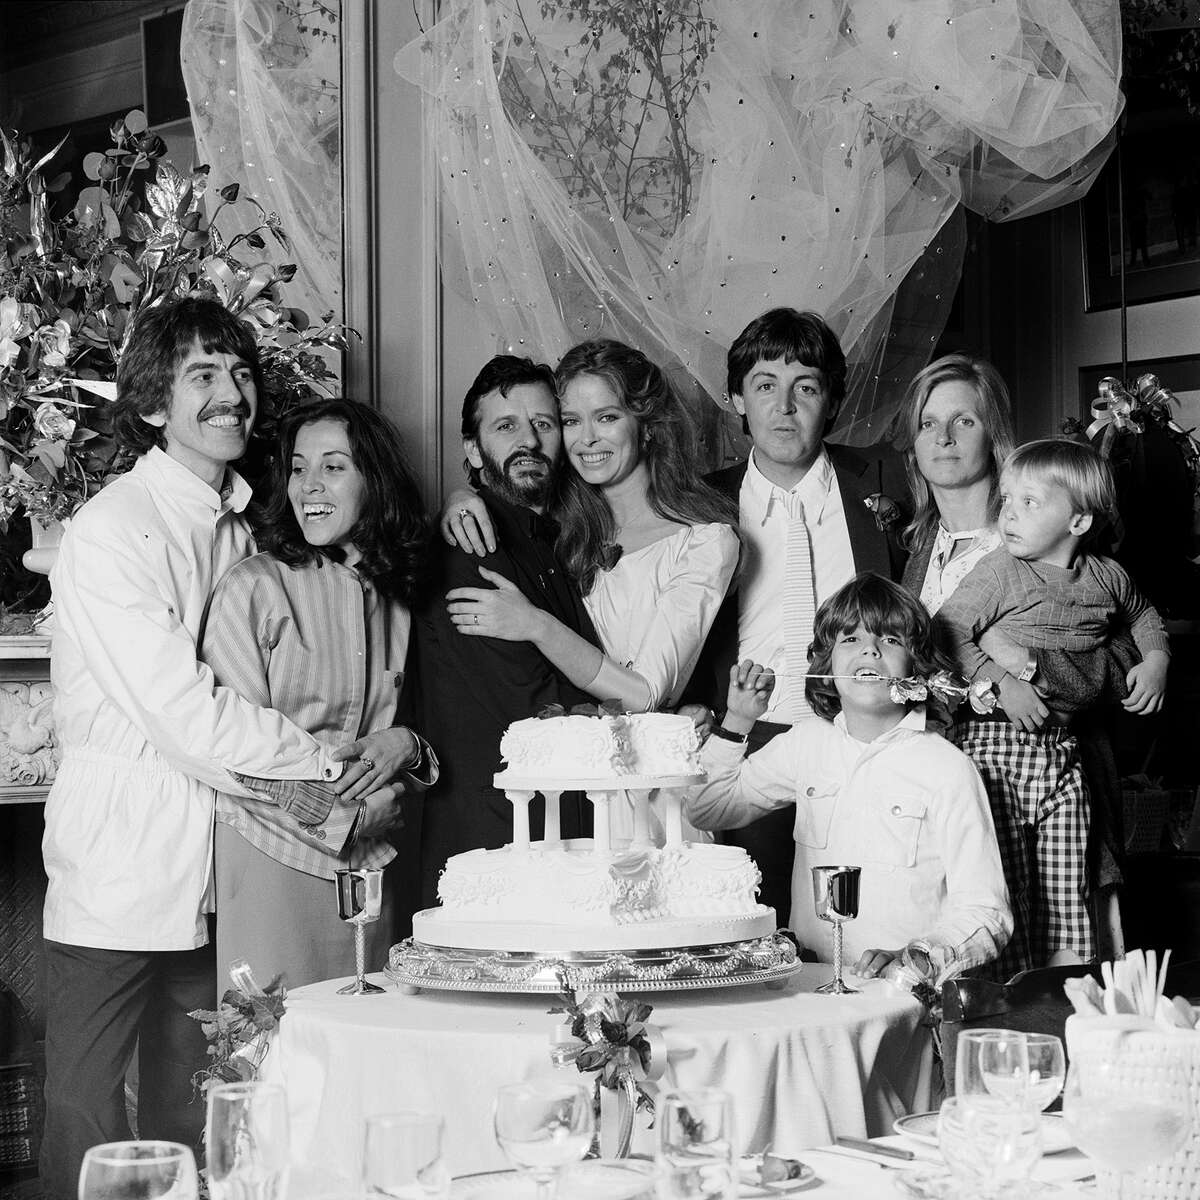 Ringo Starr and Barbara Bach's wedding day, April 27, 1981, with the two other surviving Beatles and their families. Linda McCartney is holding James, her son with Paul McCartney. The other child is Bach's by a previous marriage, Gianni Gregorini.